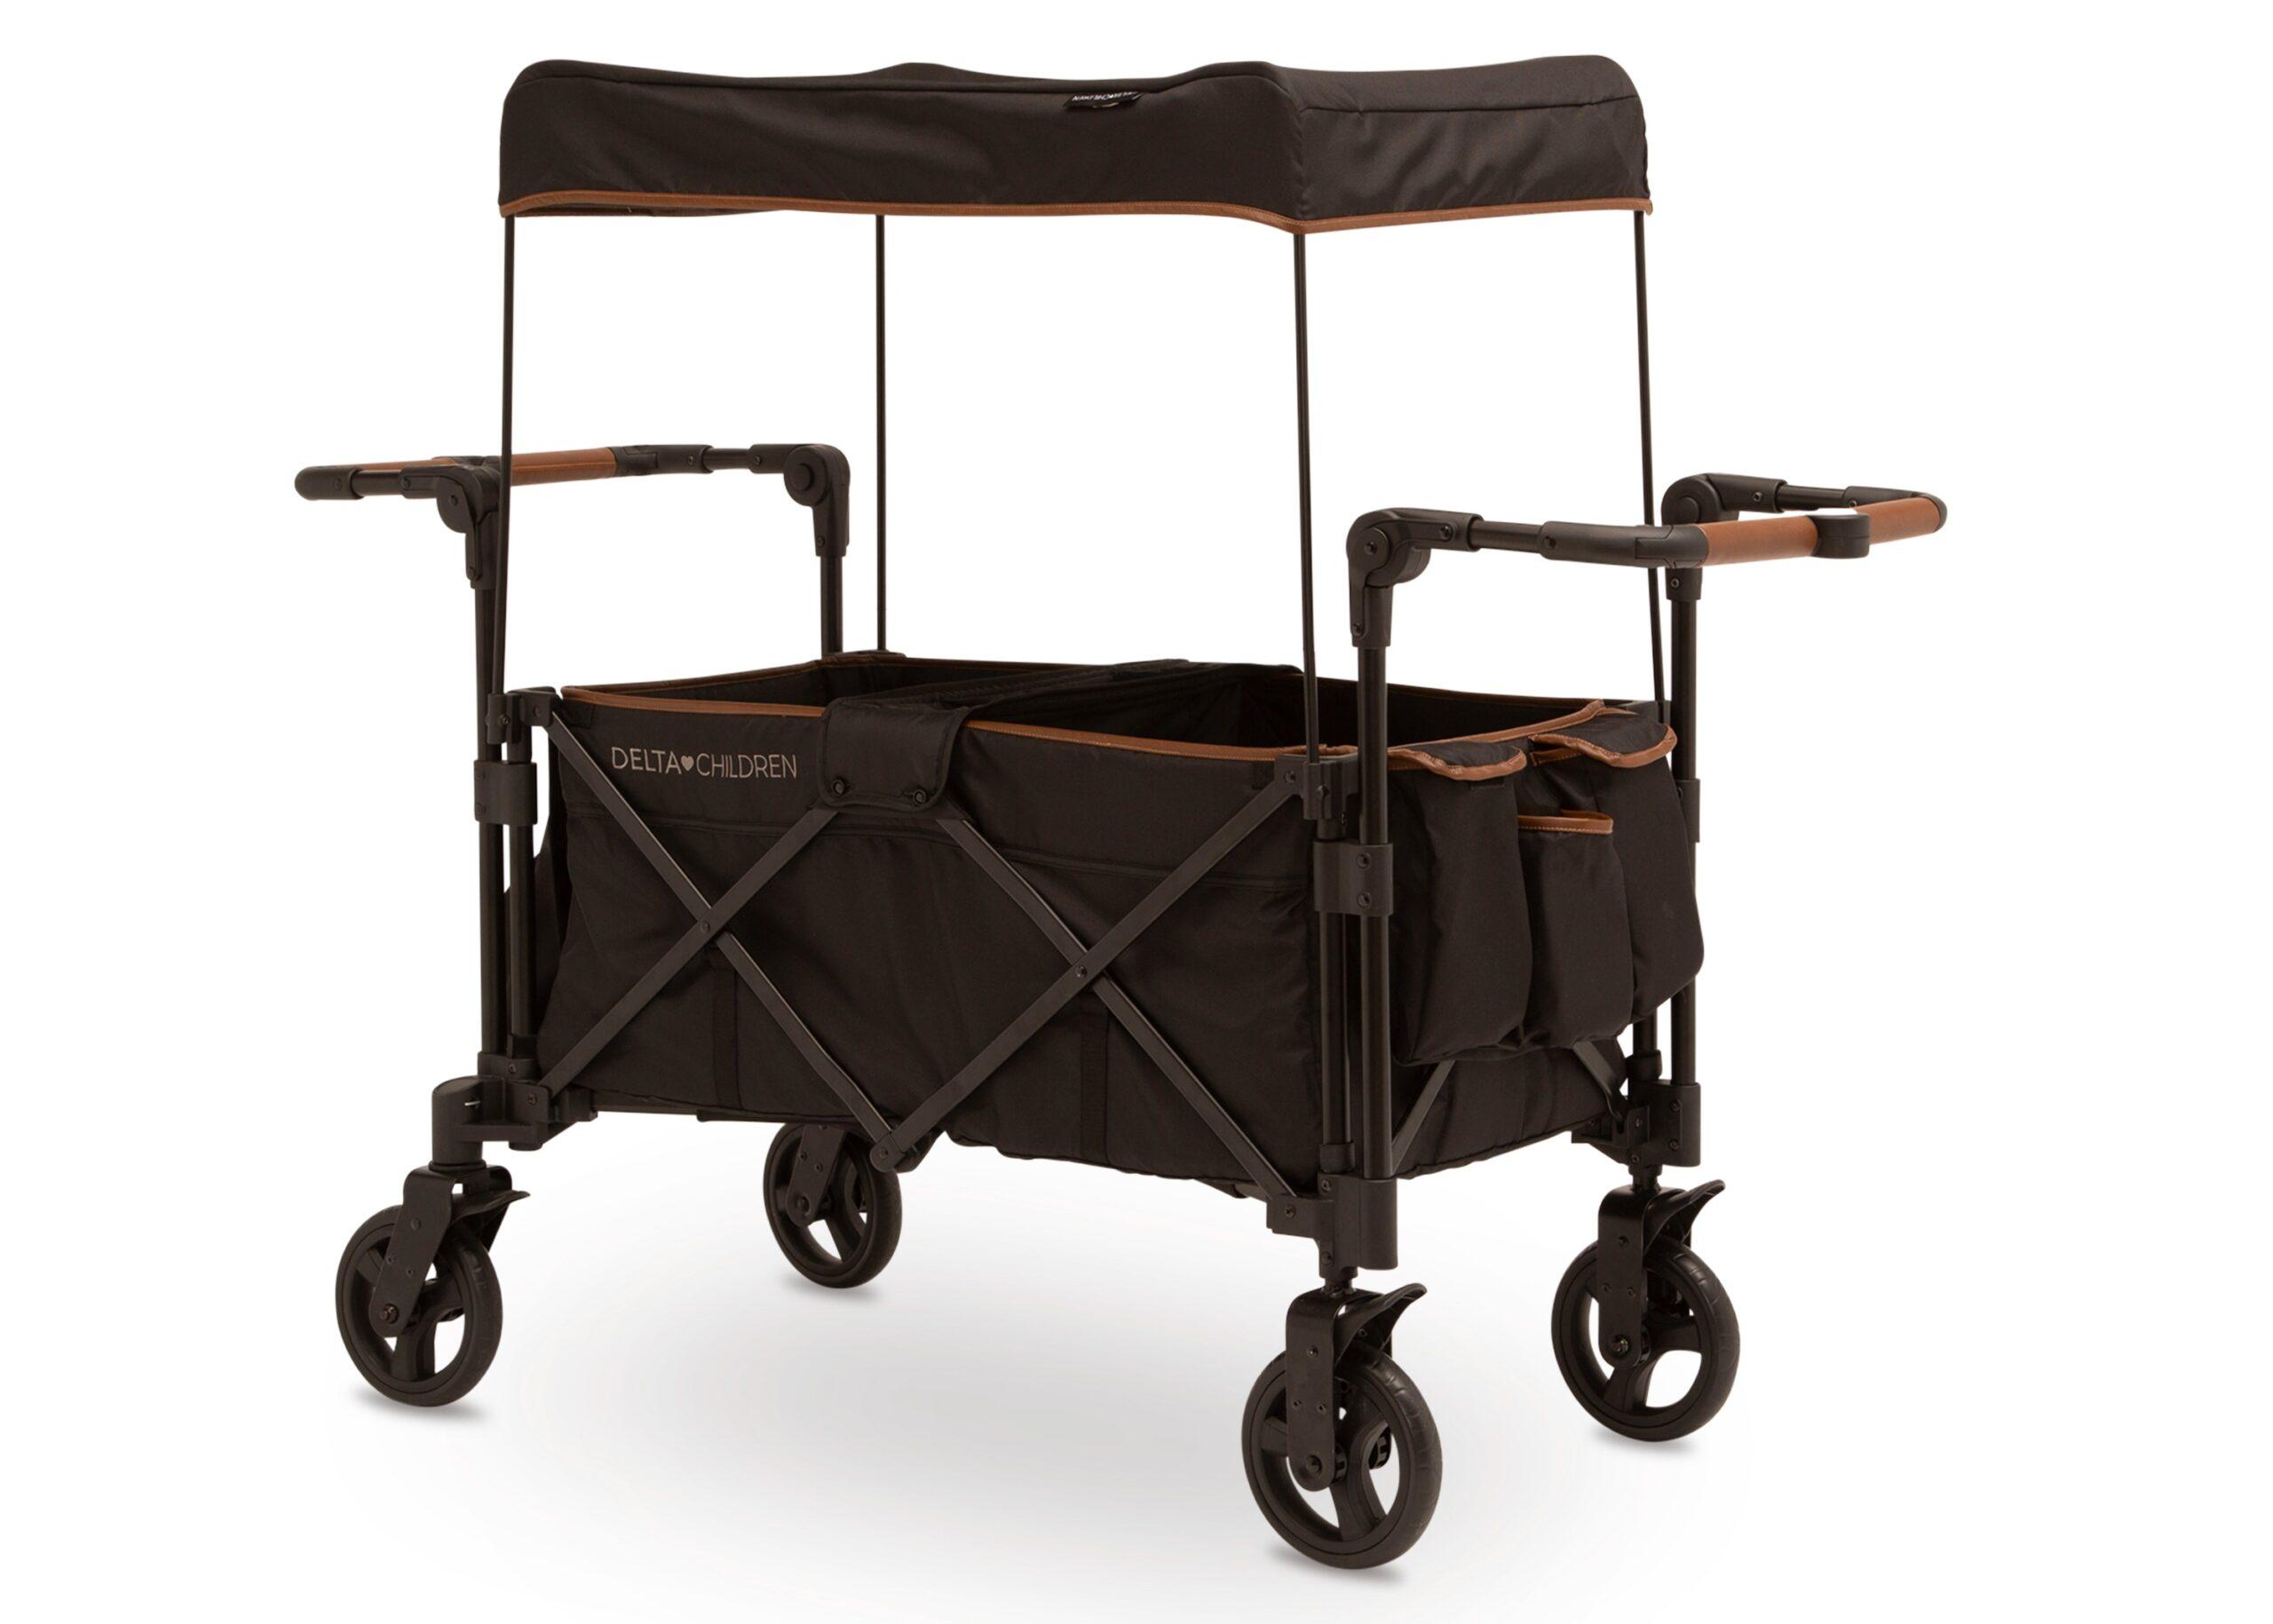 When it comes to uneven terrain, sandy beaches, or rocky mountain trails, a regular stroller just won’t cut it! Thankfully there is a solution that will survive any environment, while also providing extra storage space and convenience. Cue the Wagon Stroller! e6e52d2c 62004 001 delta city wagon black scaled